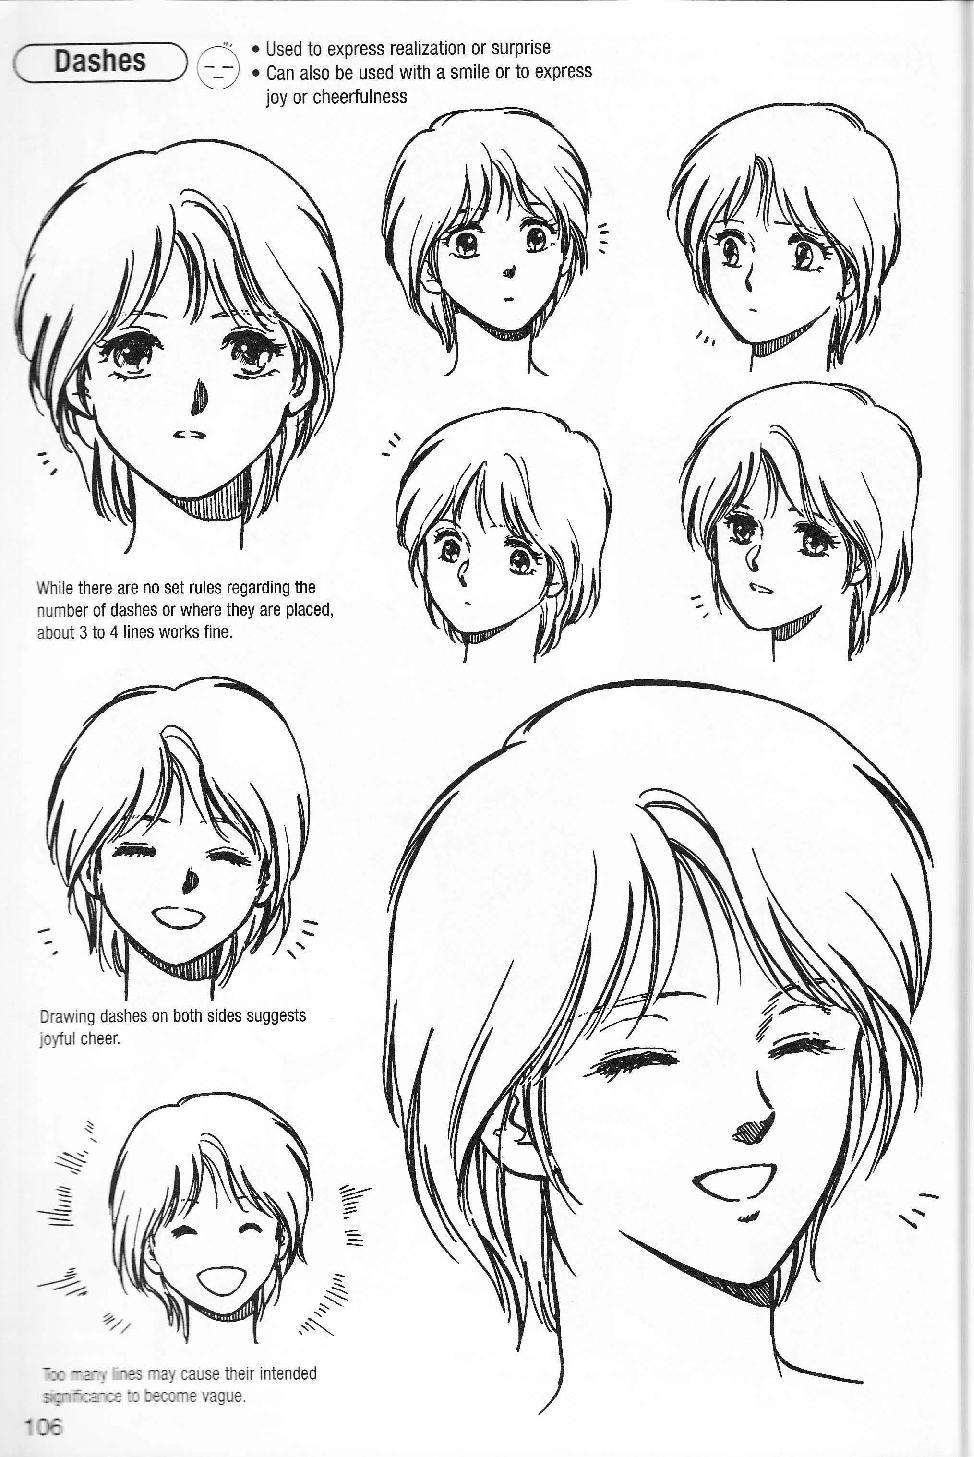 More How to Draw Manga Vol. 2 - Penning Characters 107